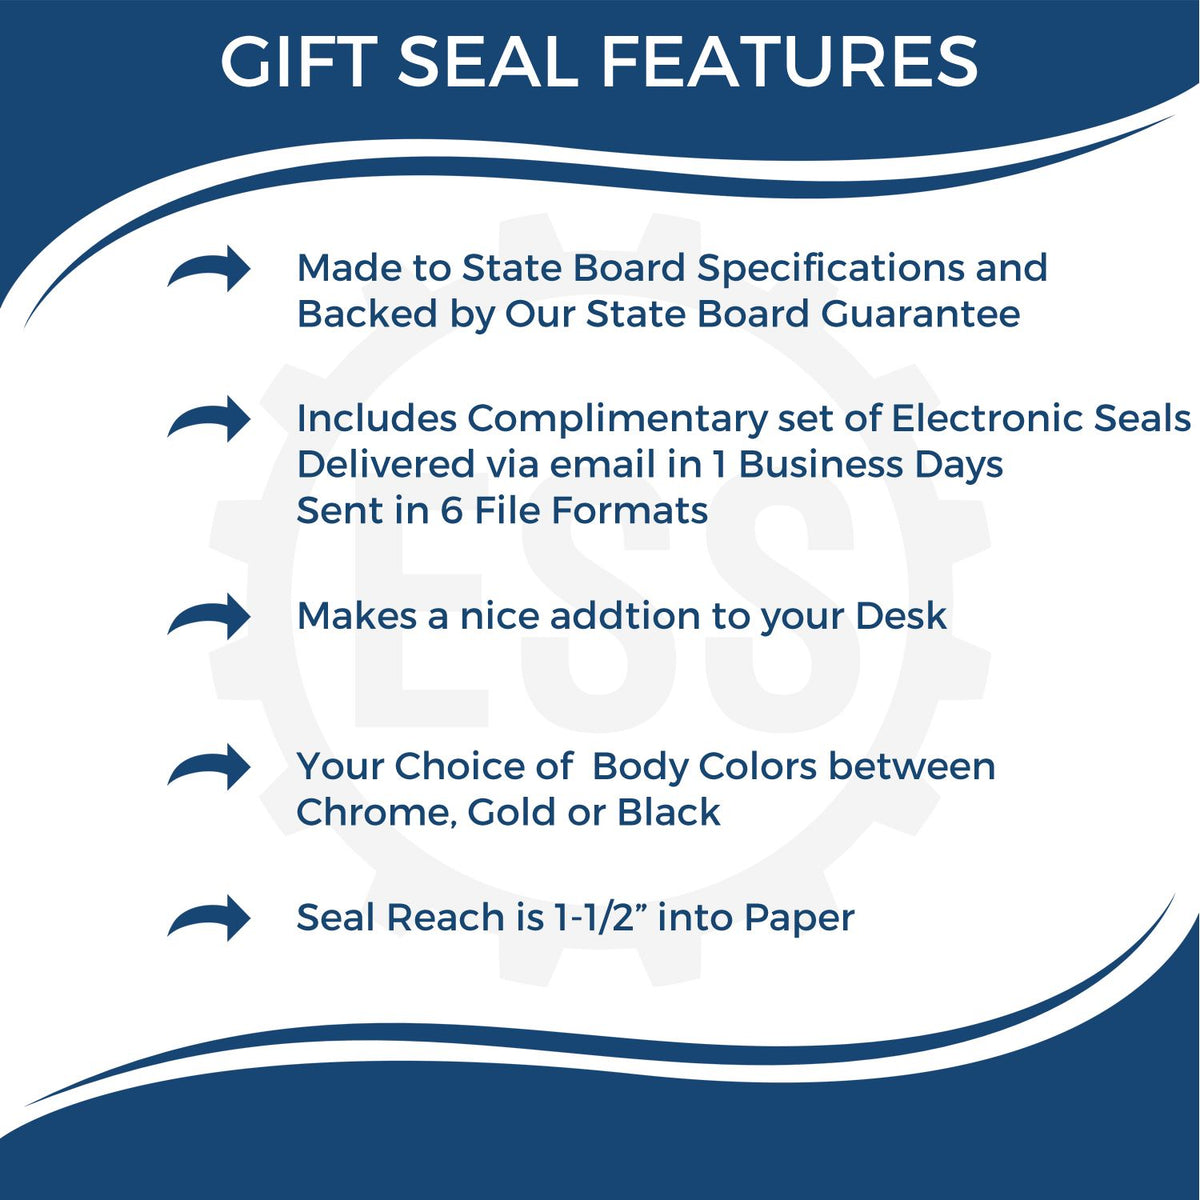 A picture of an infographic highlighting the selling points for the Gift Michigan Geologist Seal